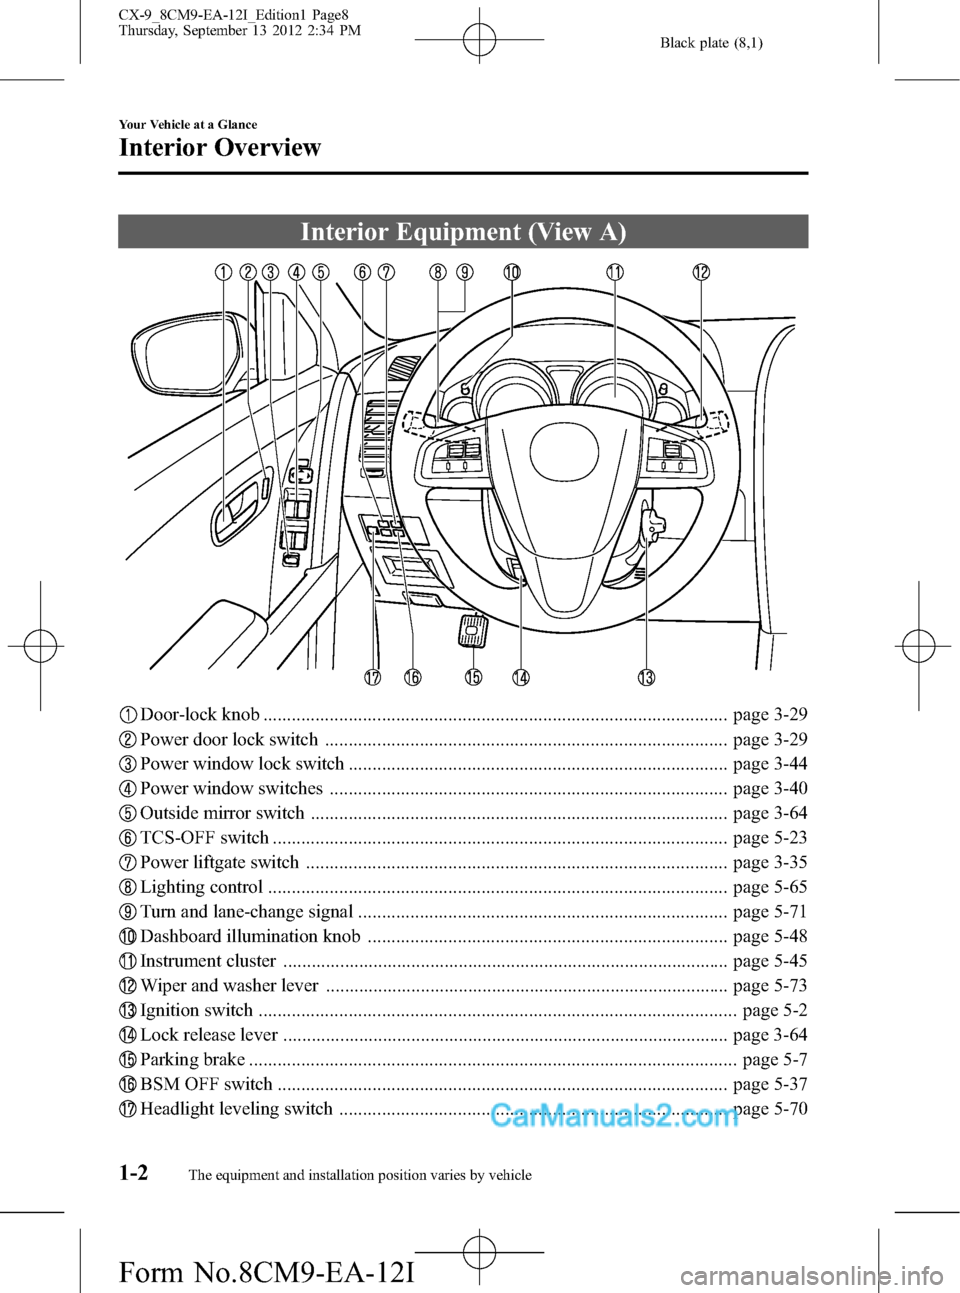 MAZDA MODEL CX-9 2013  Owners Manual (in English) Black plate (8,1)
Interior Equipment (View A)
Door-lock knob .................................................................................................. page 3-29
Power door lock switch .......